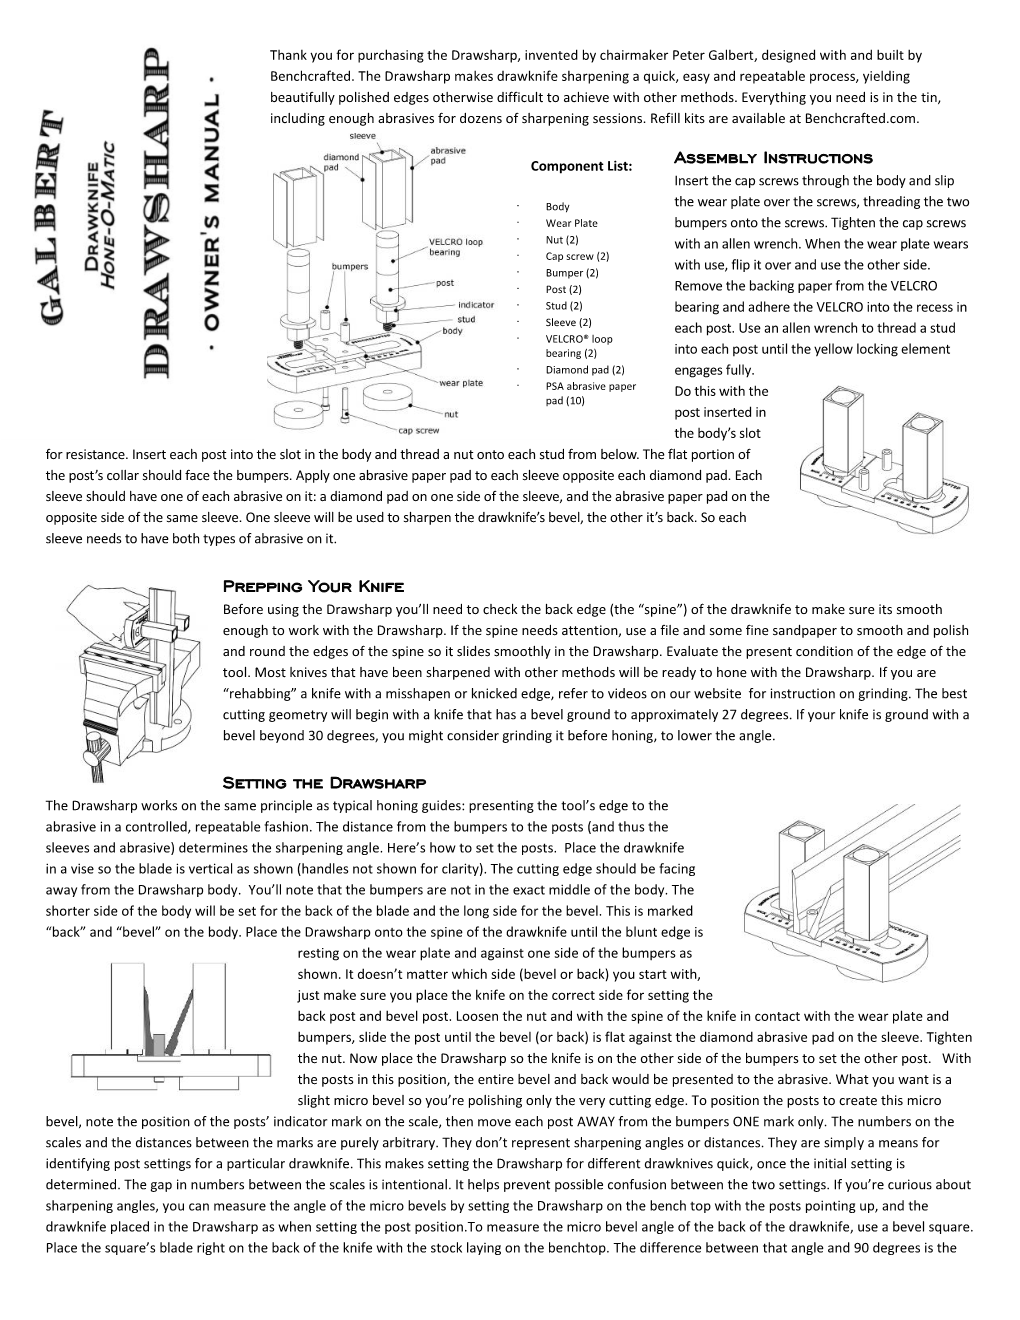 Assembly Instructions Prepping Your Knife Setting the Drawsharp